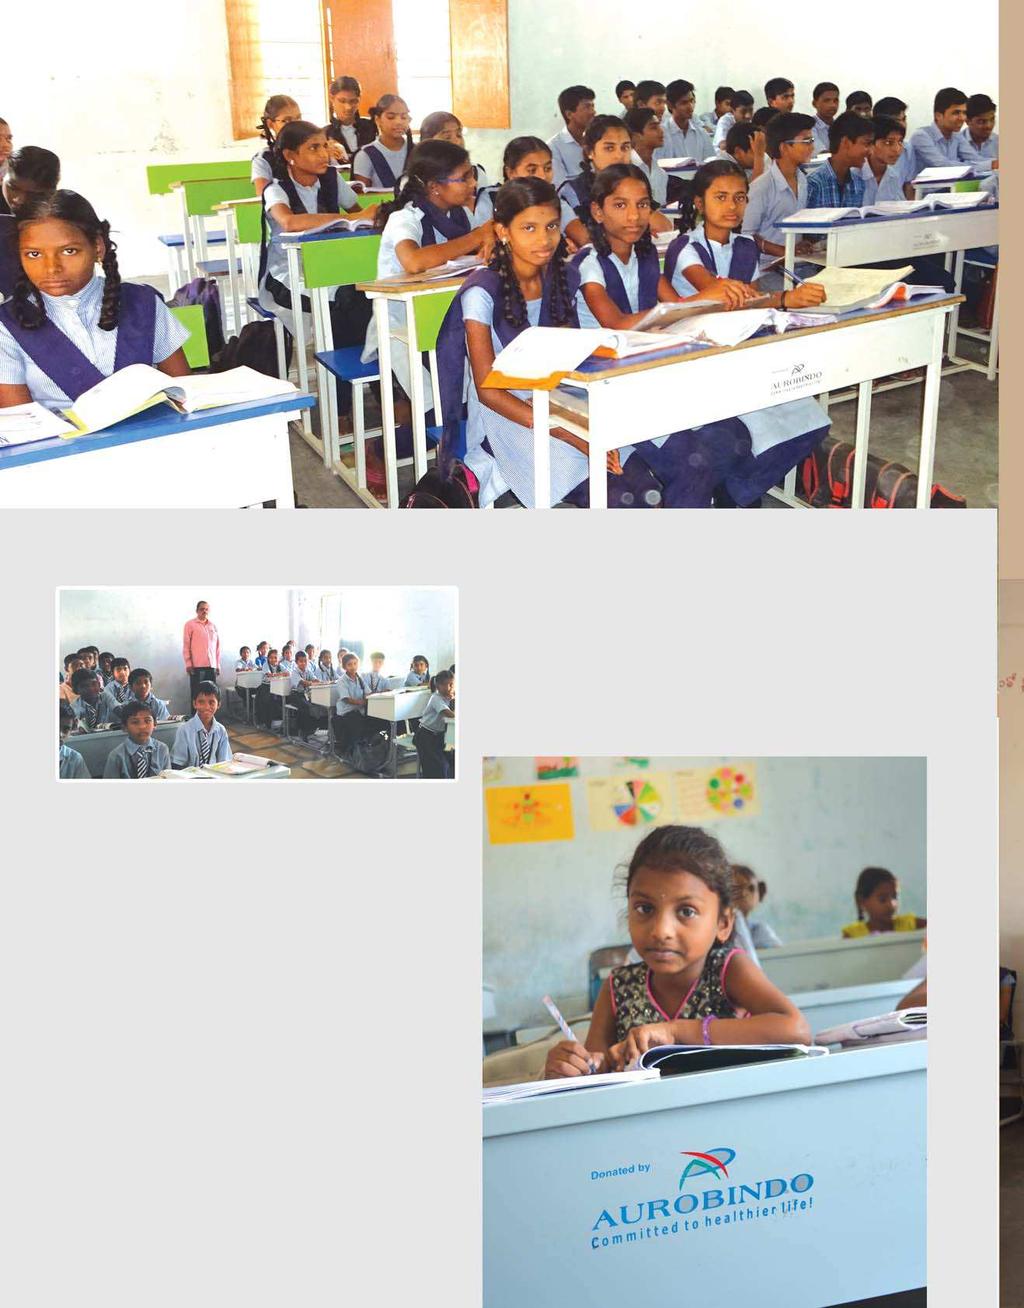 Education PROGRAMME Given Dual Desks in government schools, PLACE Various Government schools, Huzurabad area, Karimnagar district, Telangana State HAND WRITING IMPROVED With no benches in the